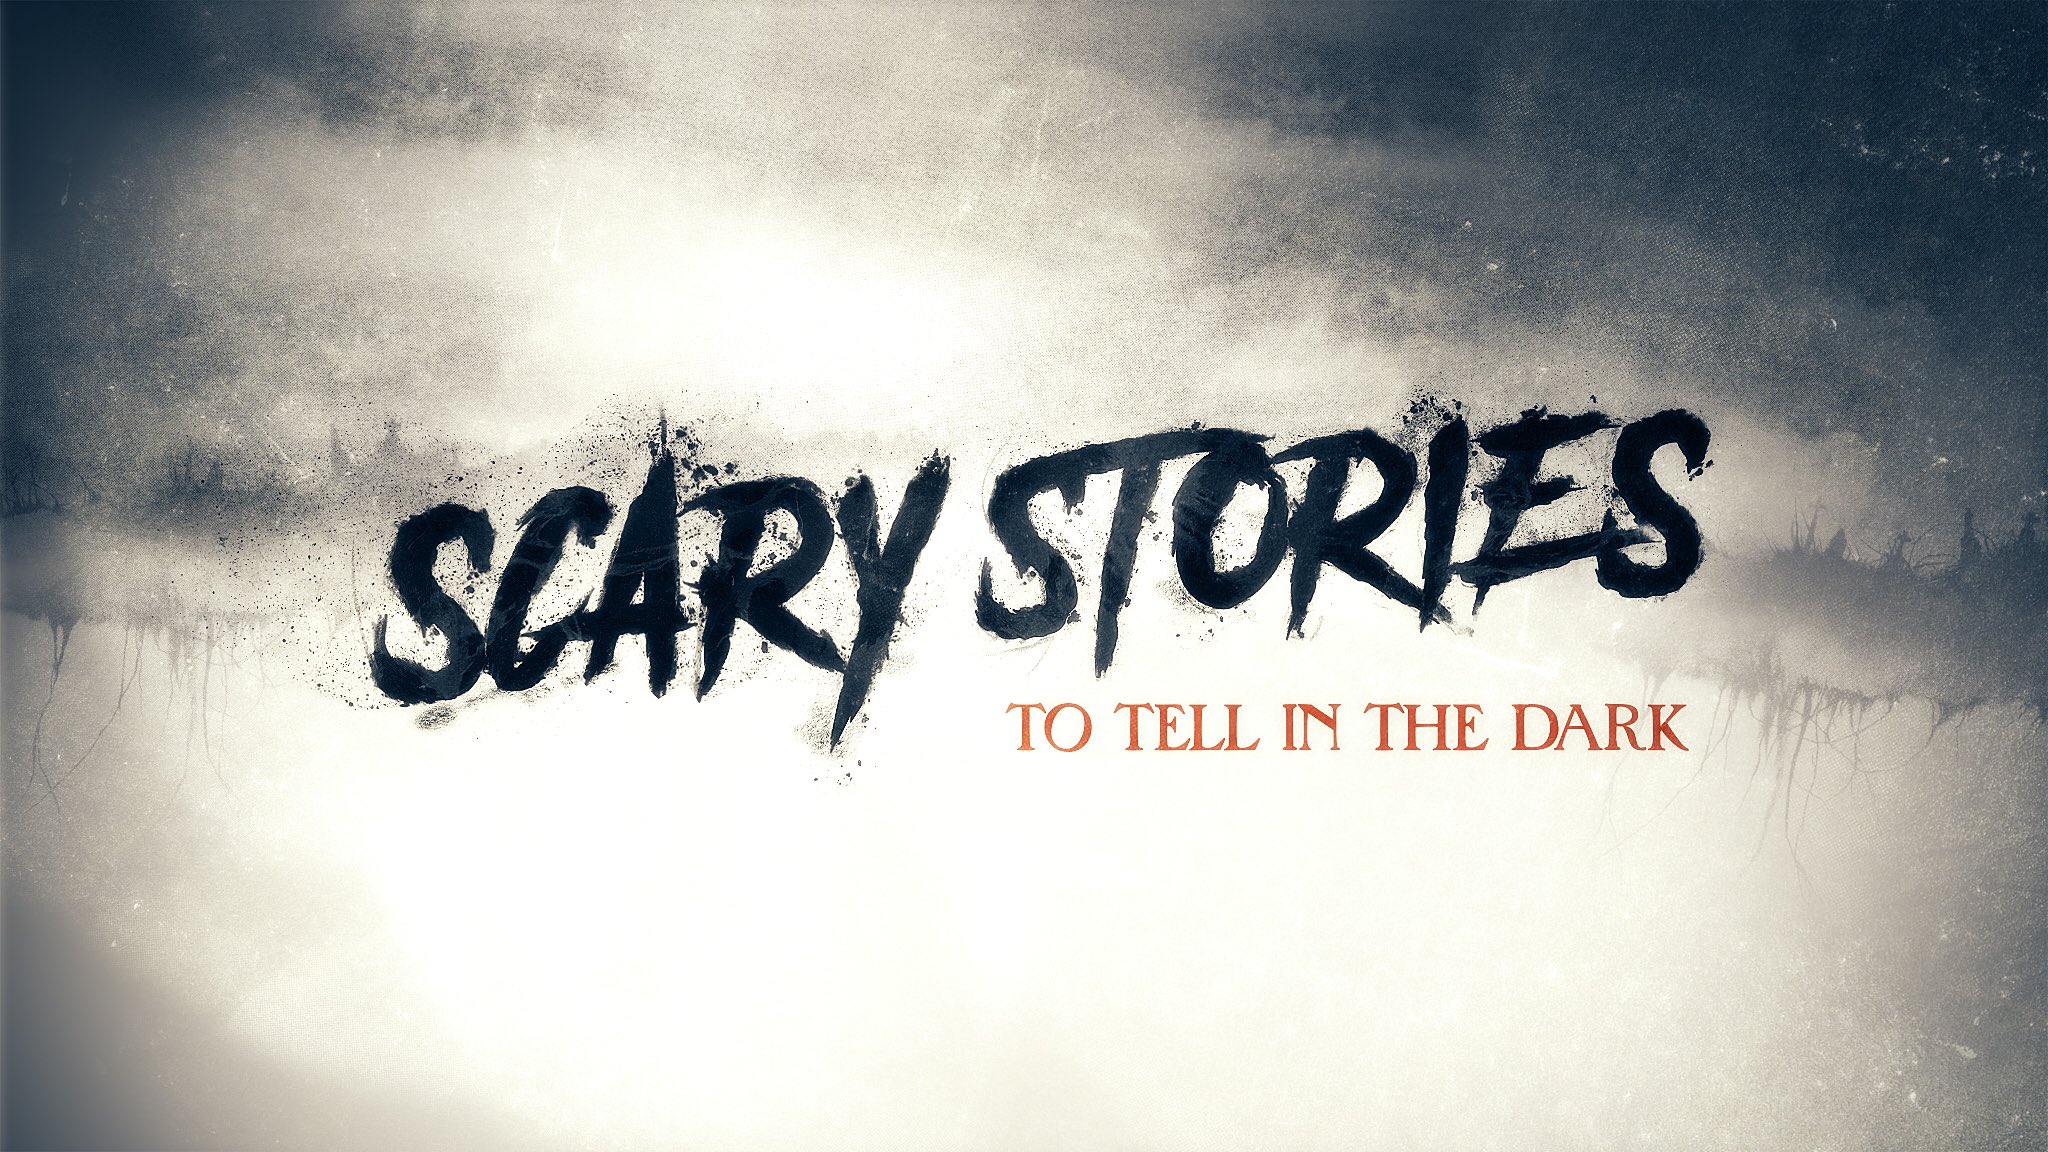 Scary Stories To Tell In The Dark على تويتر August 2019